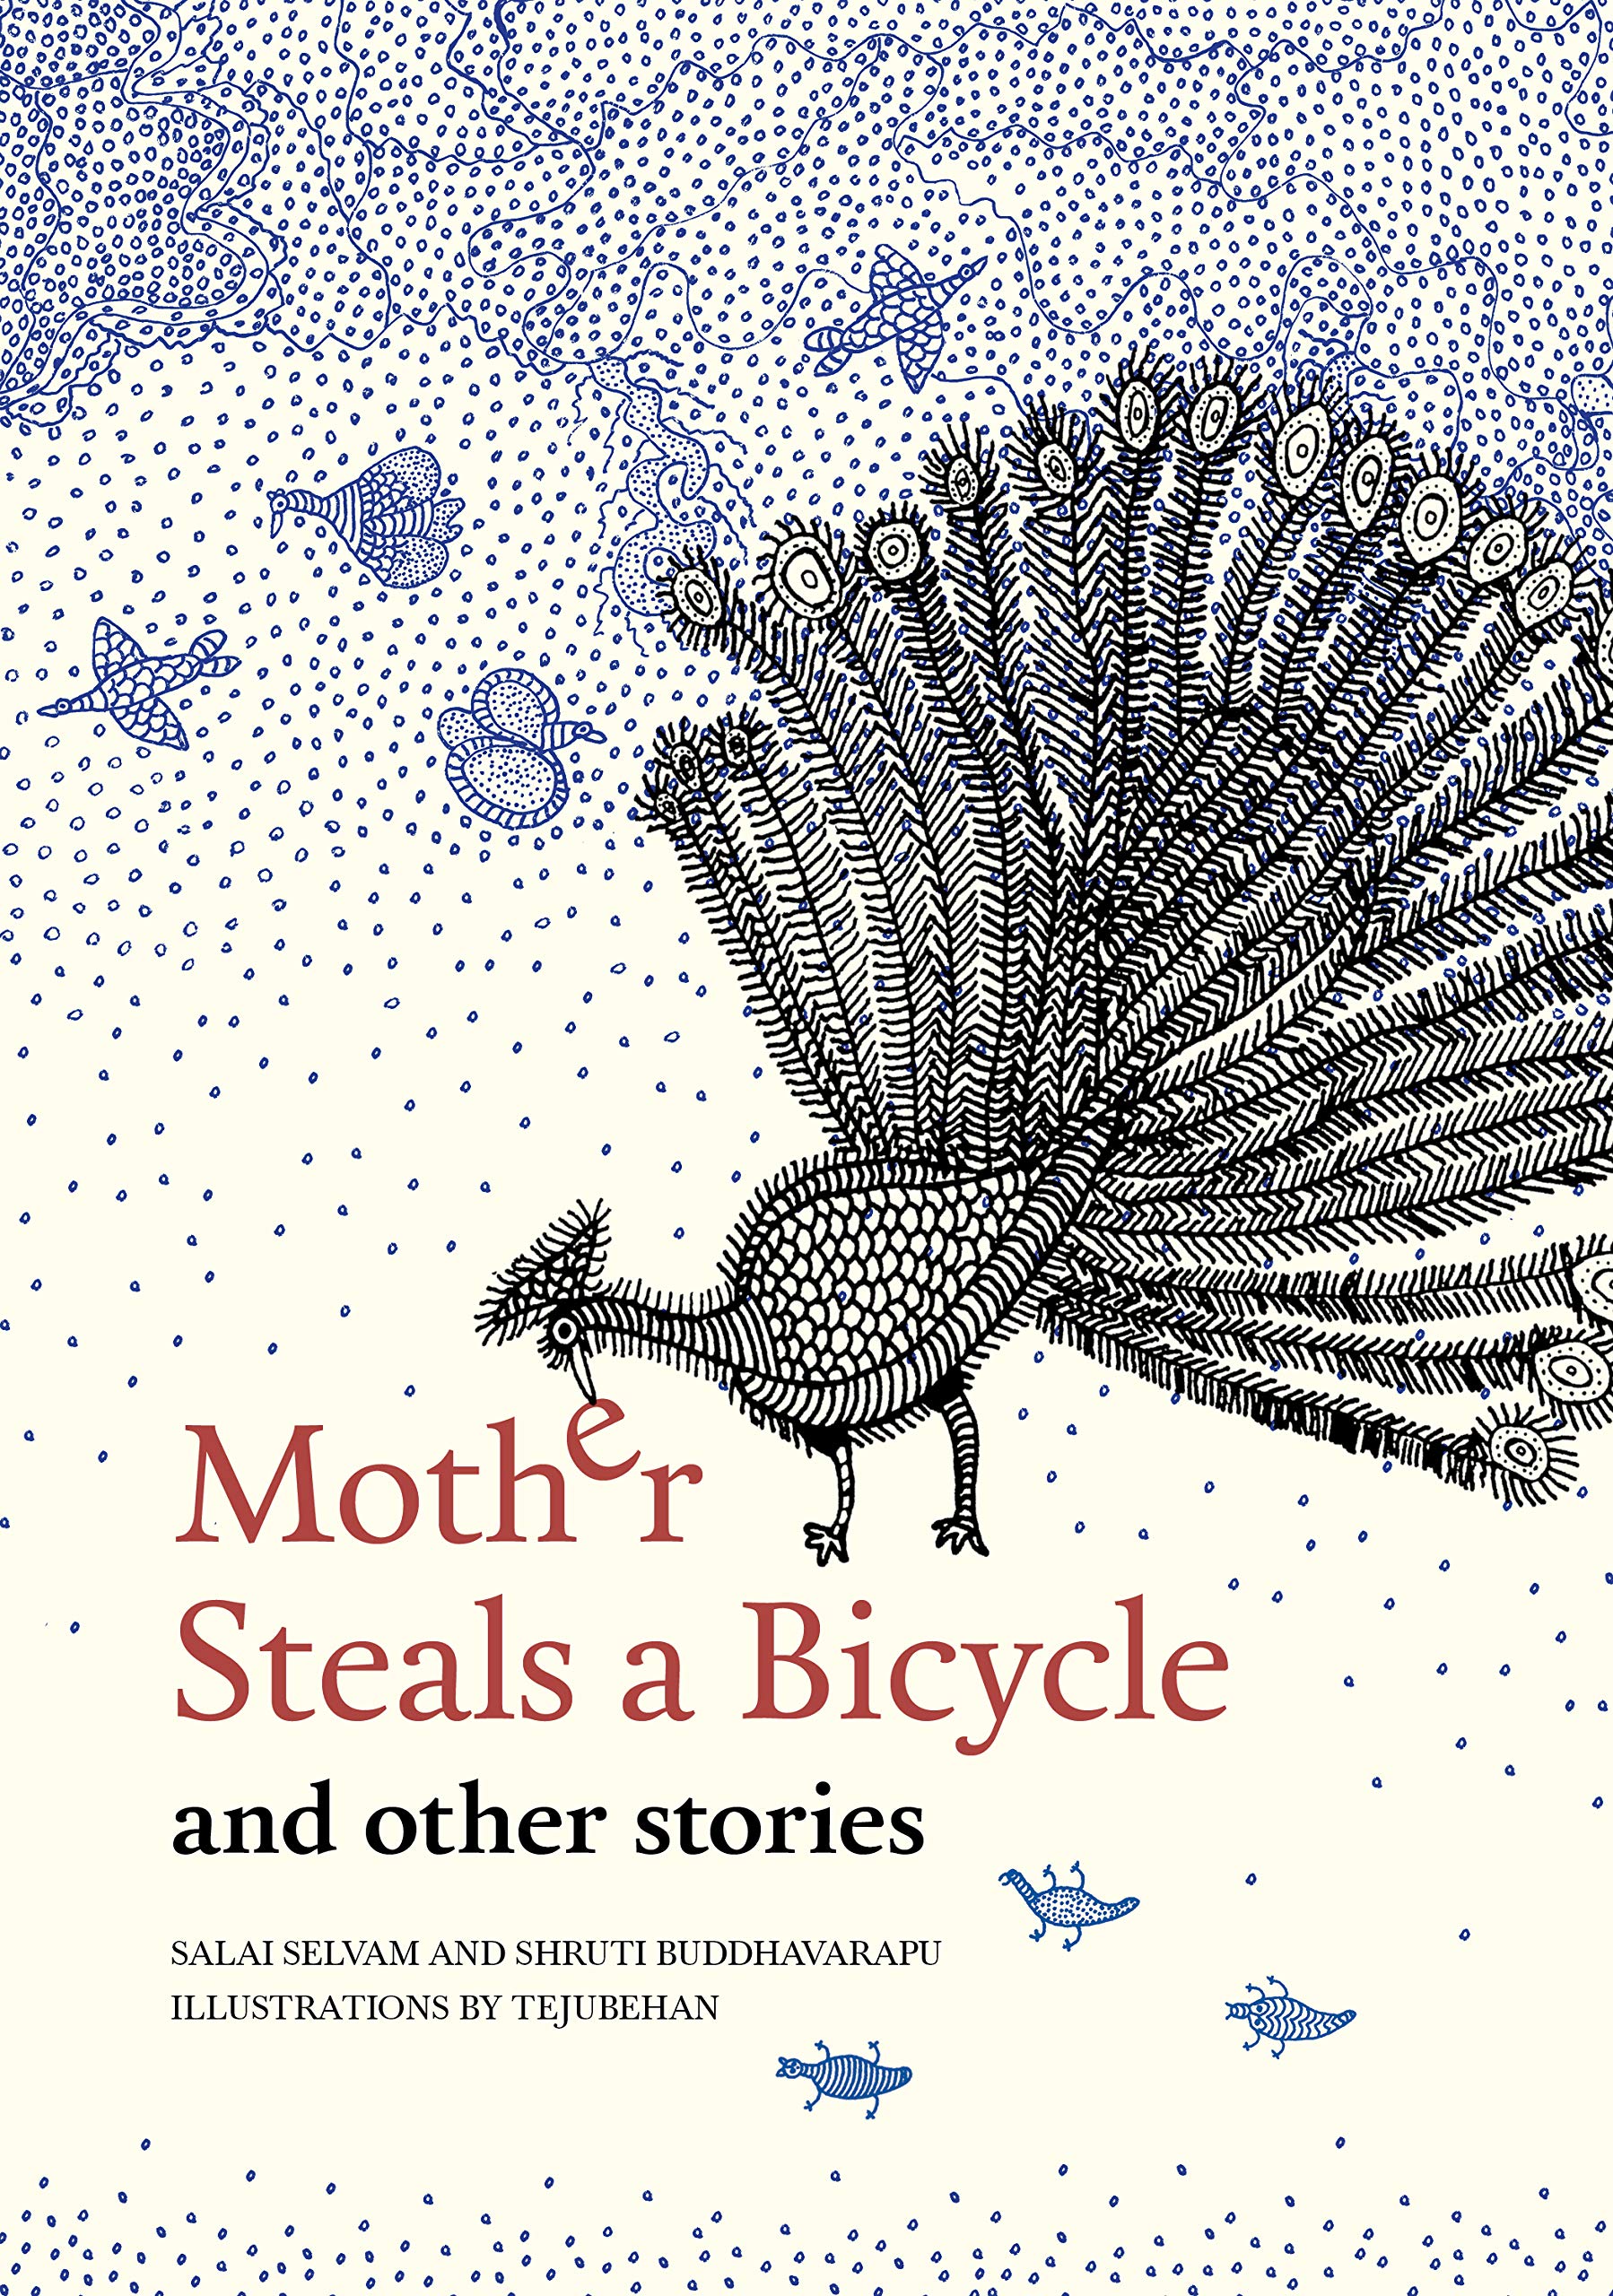 Mother Steals a Bicycle: And Other Stories